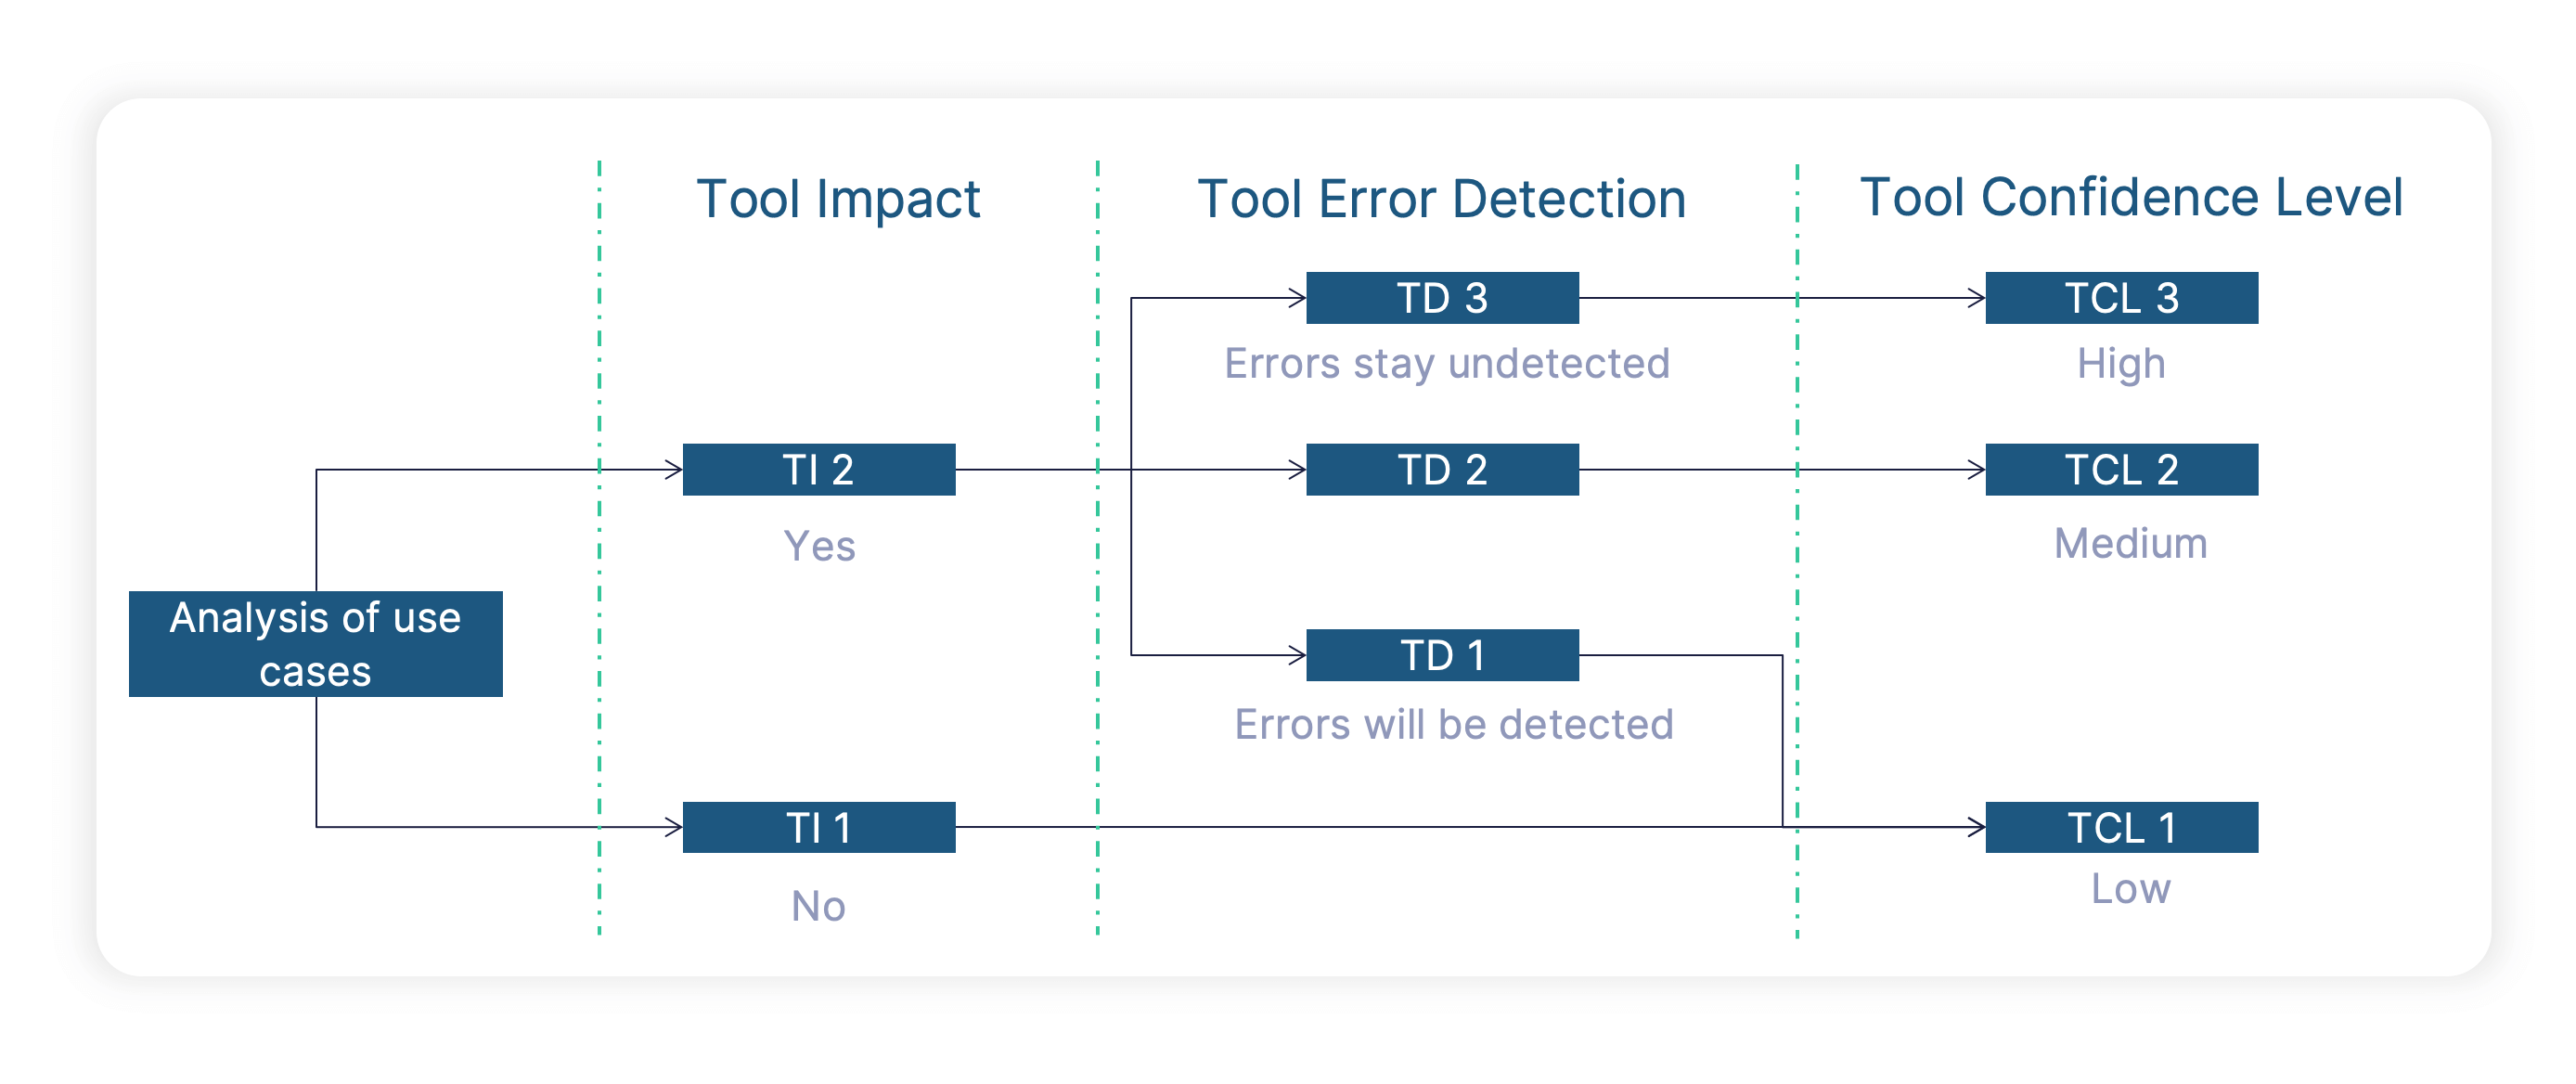 Process to determine if an ISO 26262 tool qualification is needed